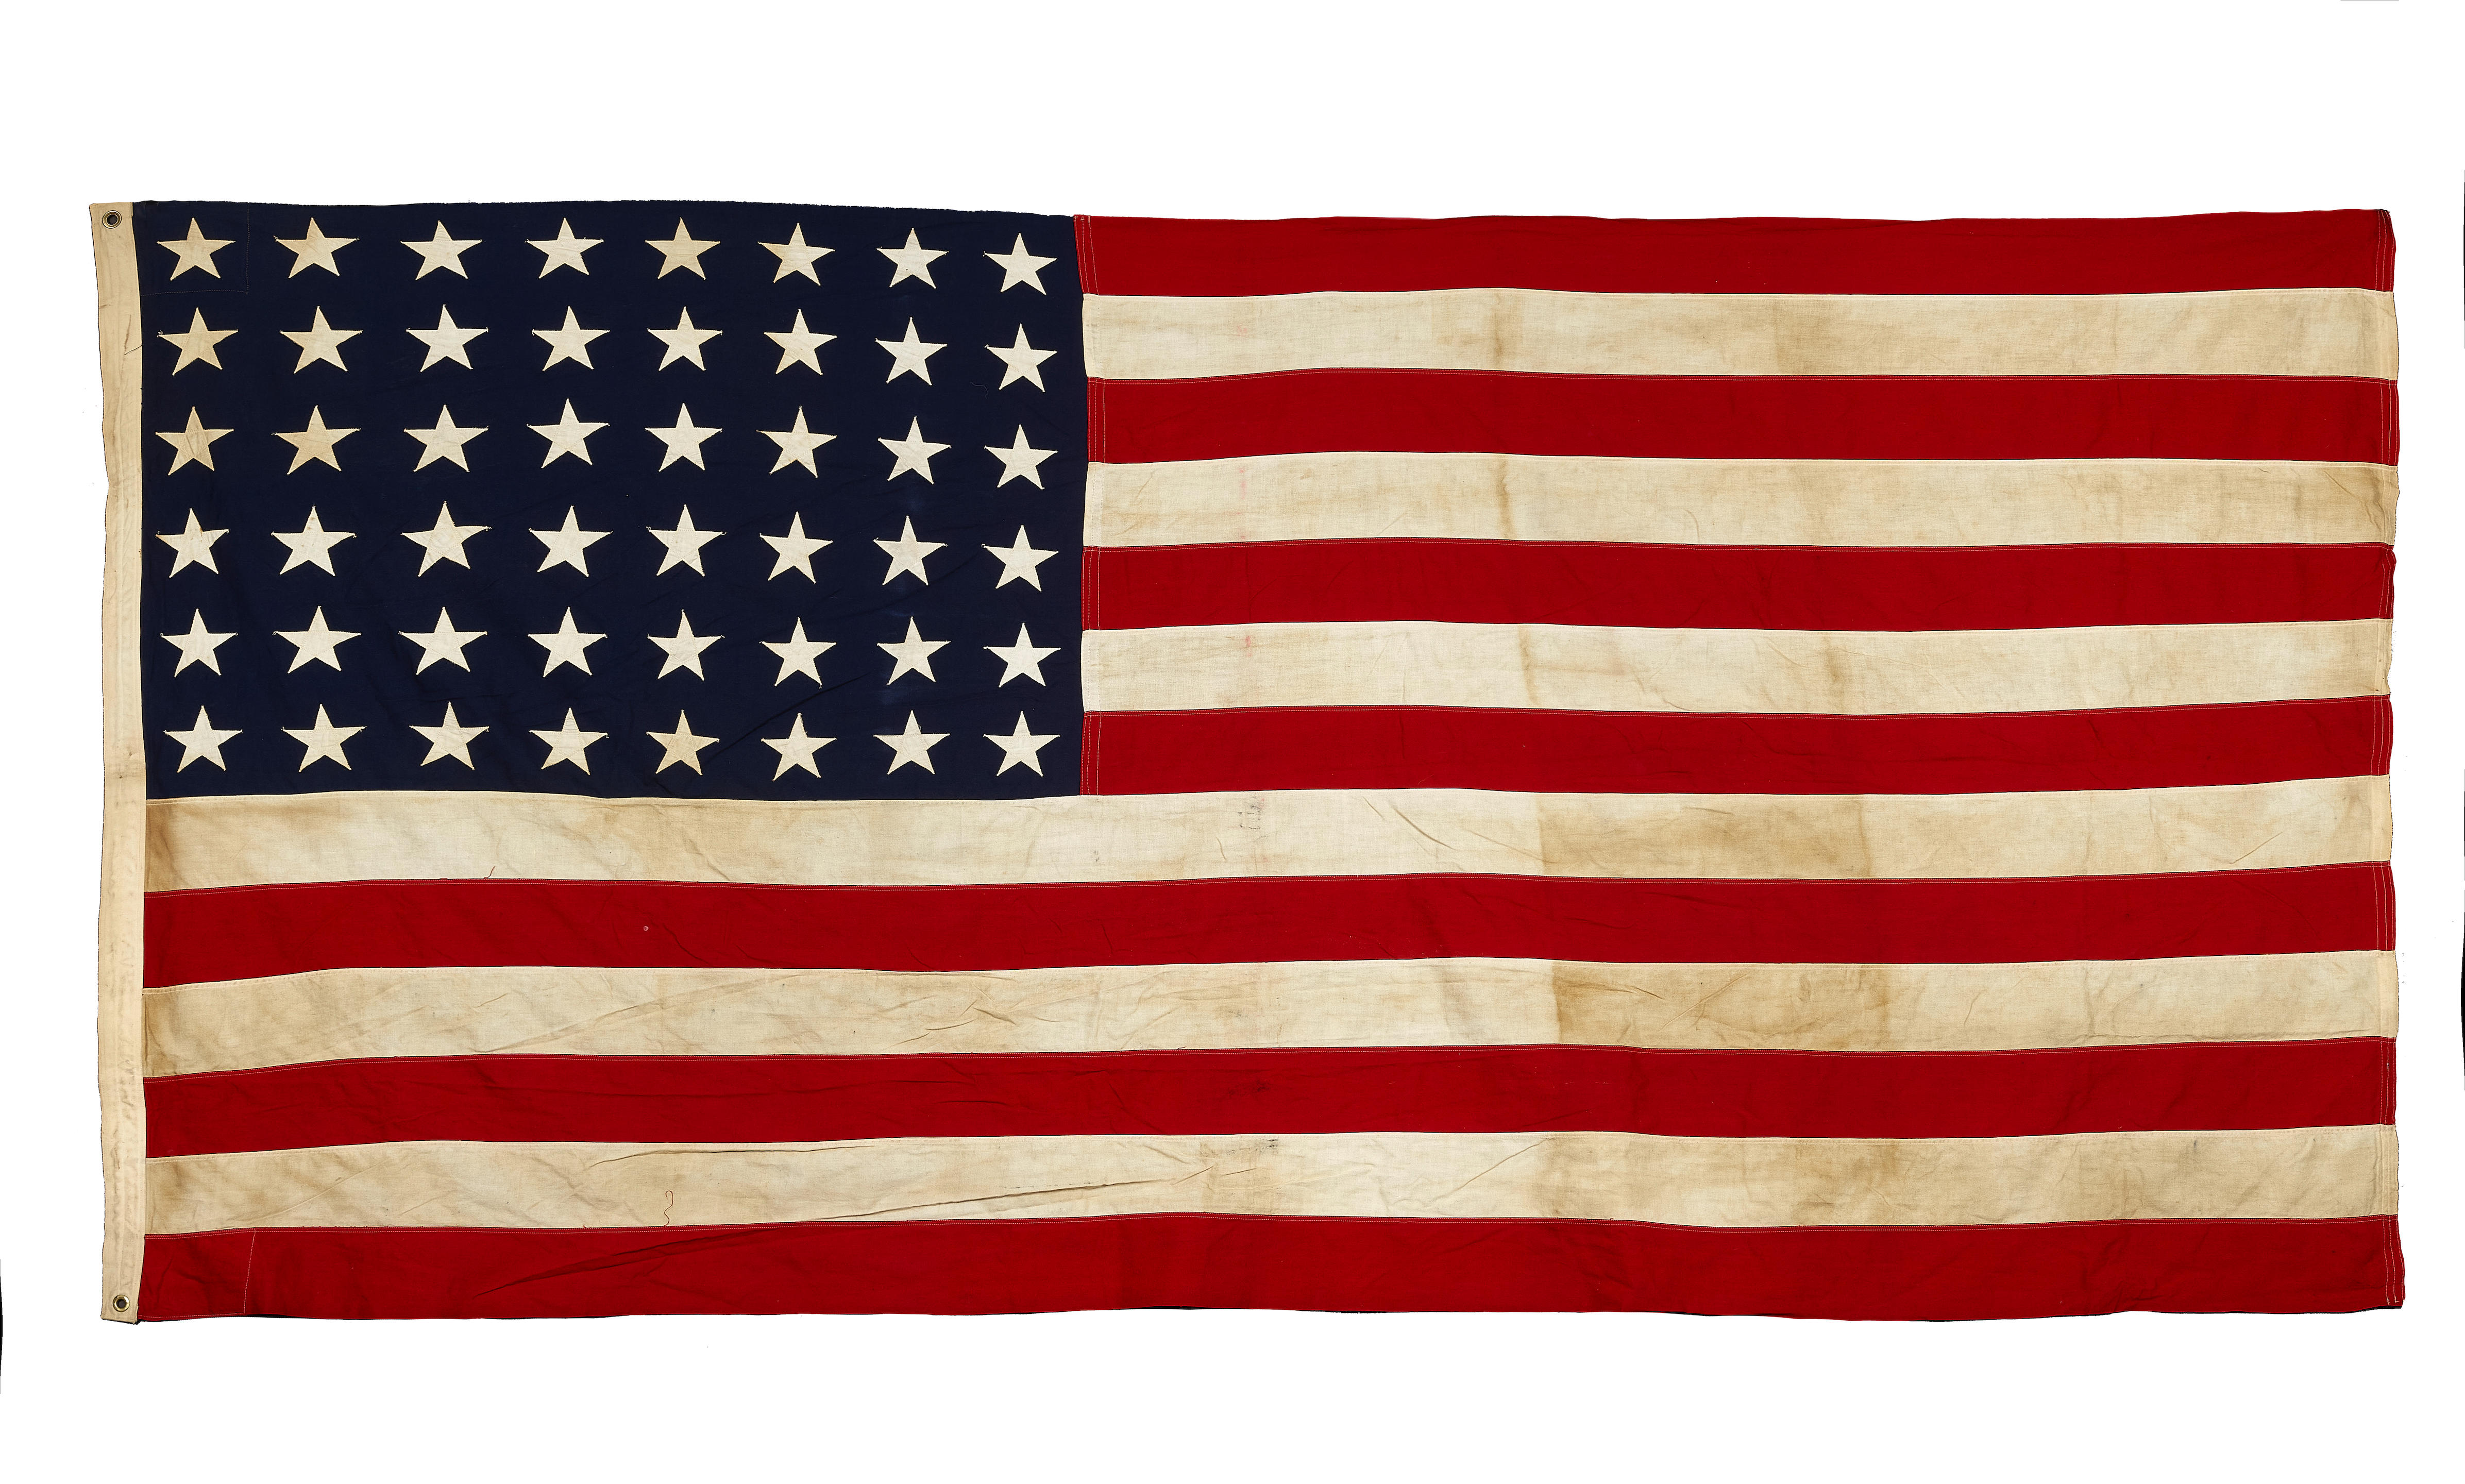 48 STAR AMERICAN FLAG, FOR NAVAL USE.